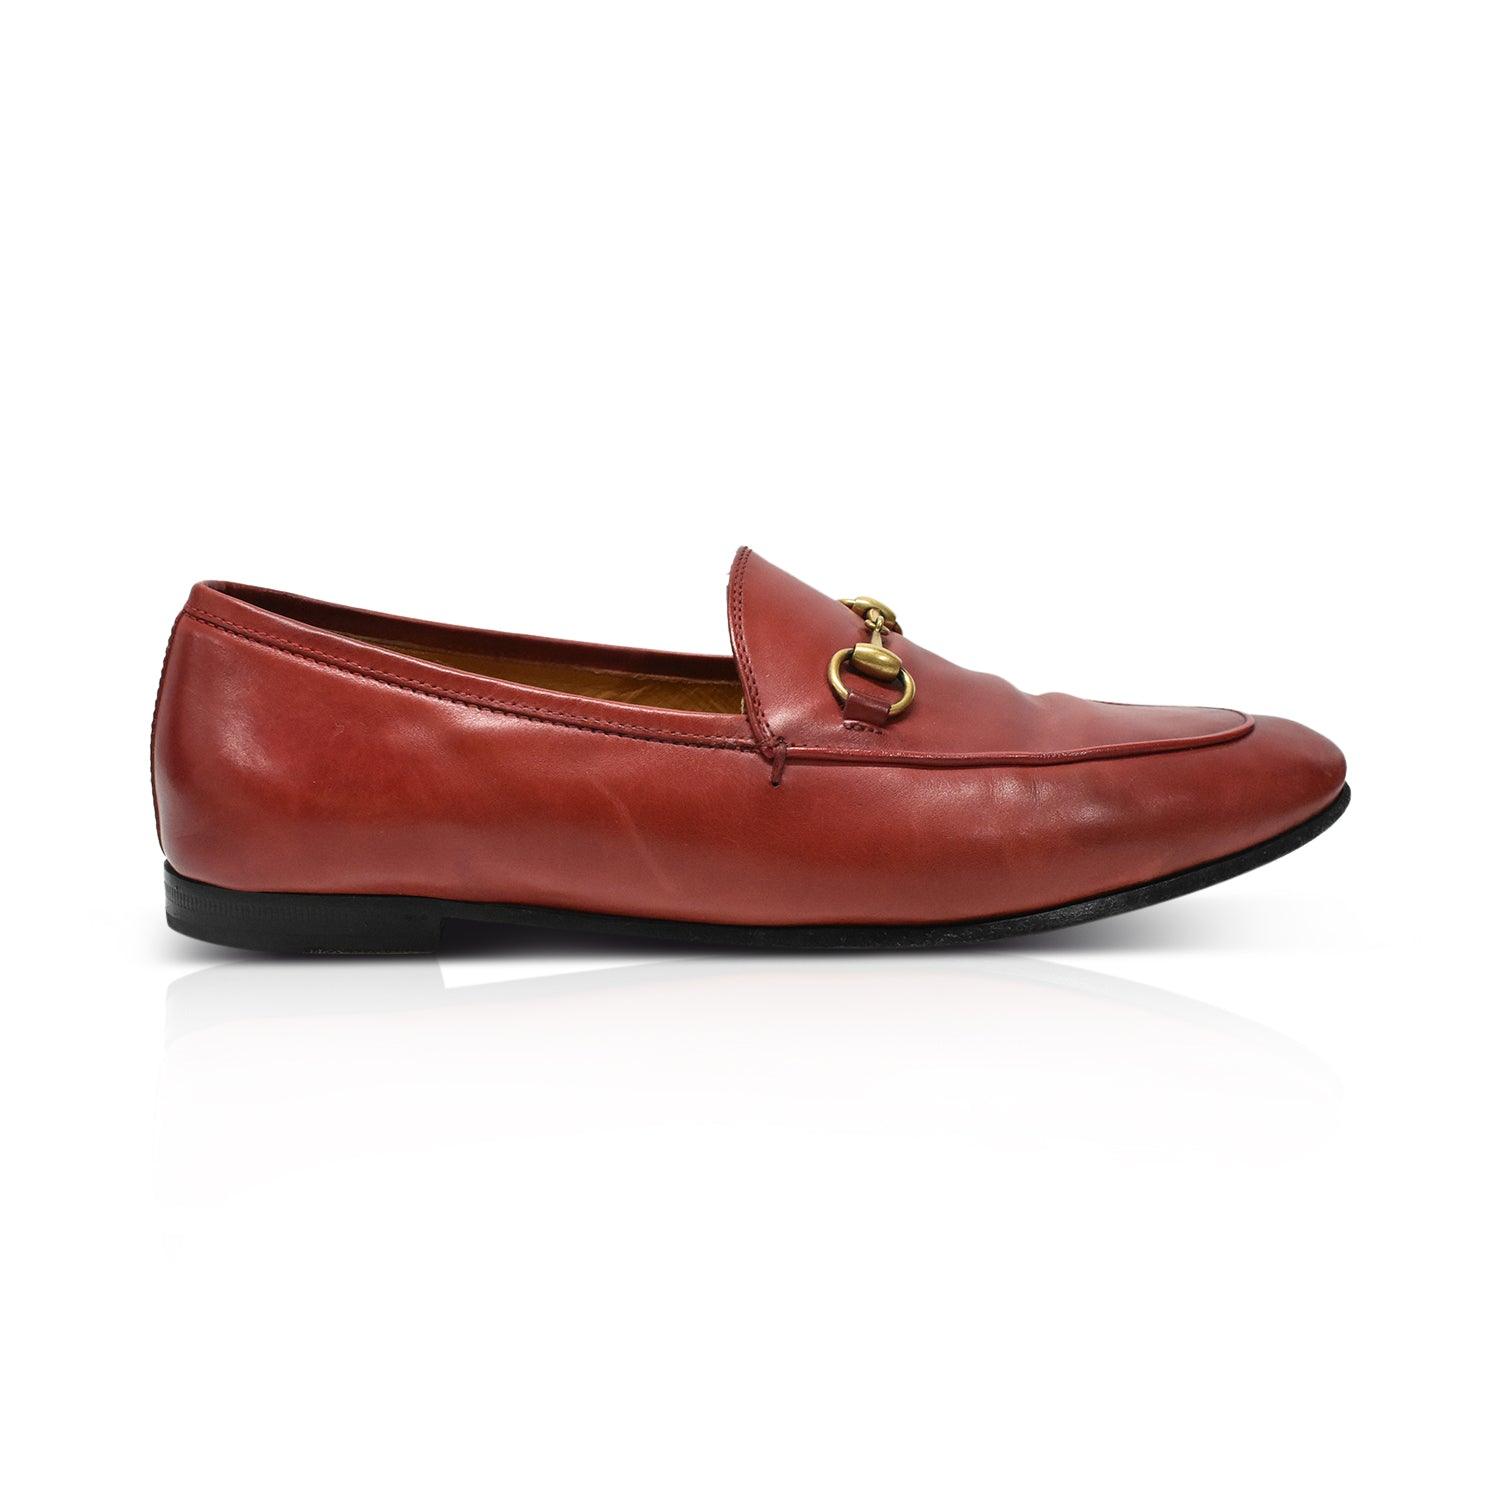 Gucci Loafers - Women's 39 - Fashionably Yours